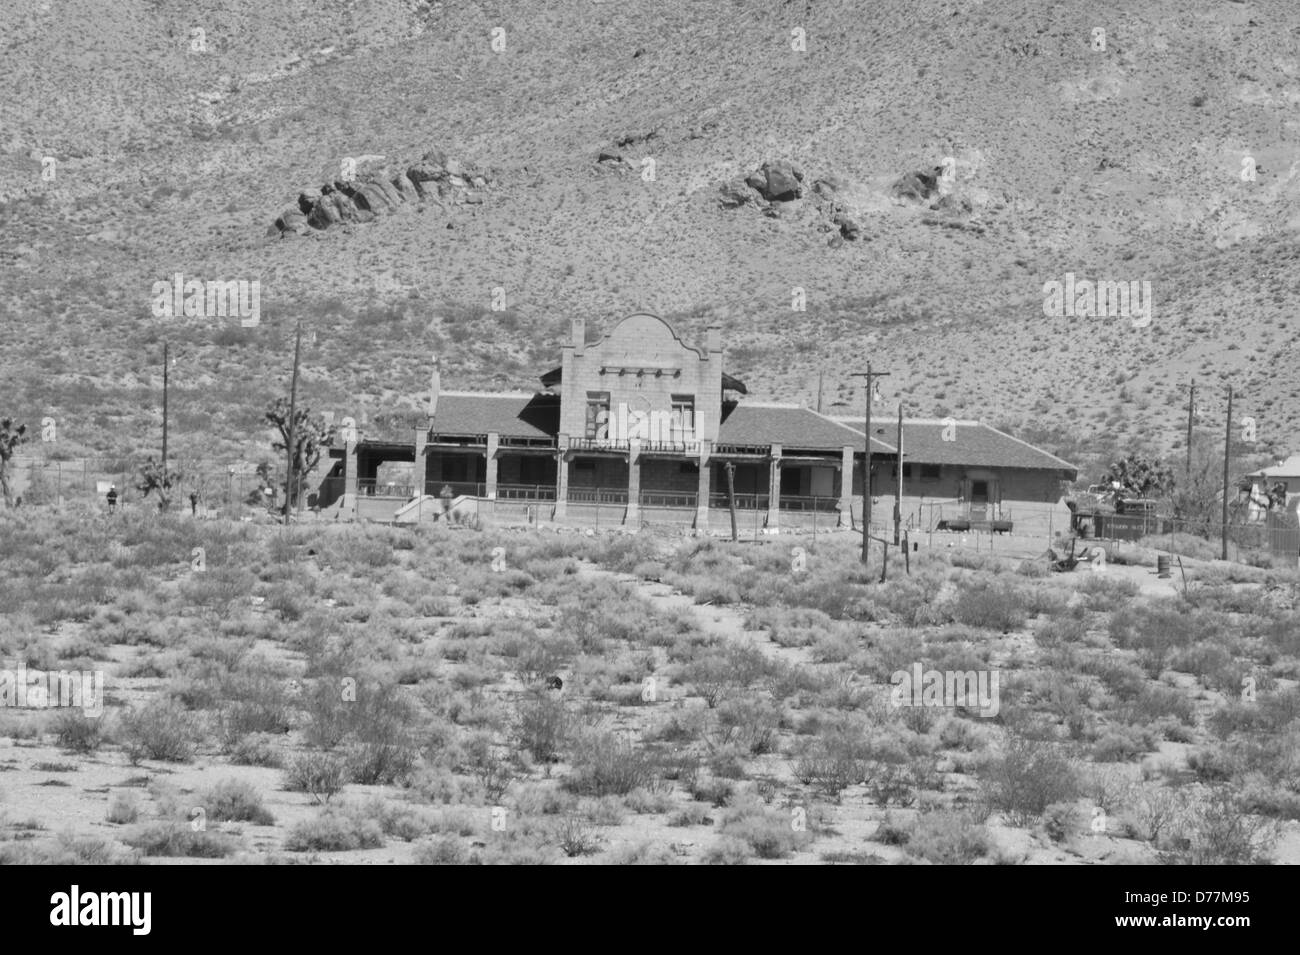 Rhyolite ghost town building. Stock Photo